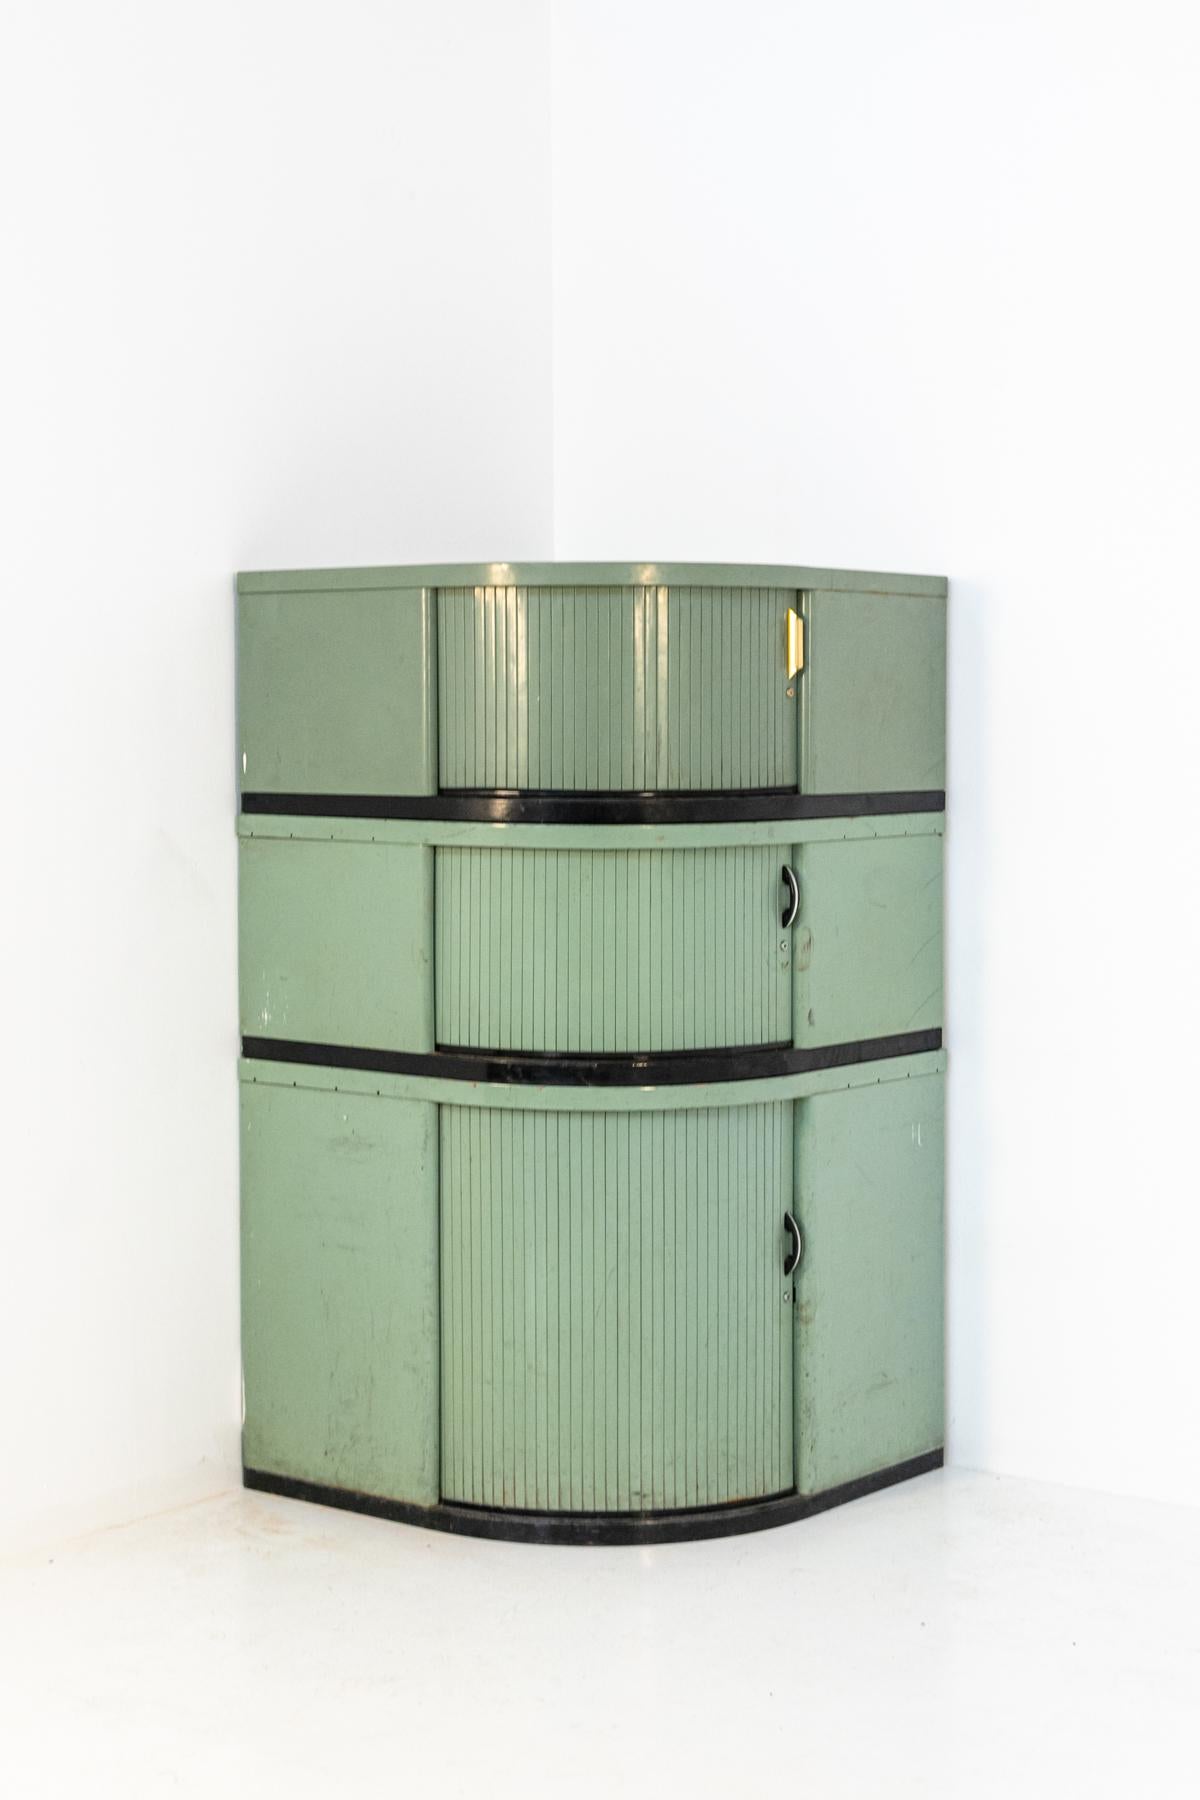 French made vintage metal corner cabinet. The cabinet is in the Industrial Chic style of the 1930s. The corner unit is composed of three pieces that can be stacked together, in the middle of which there is a louver or shutter opening, which can be